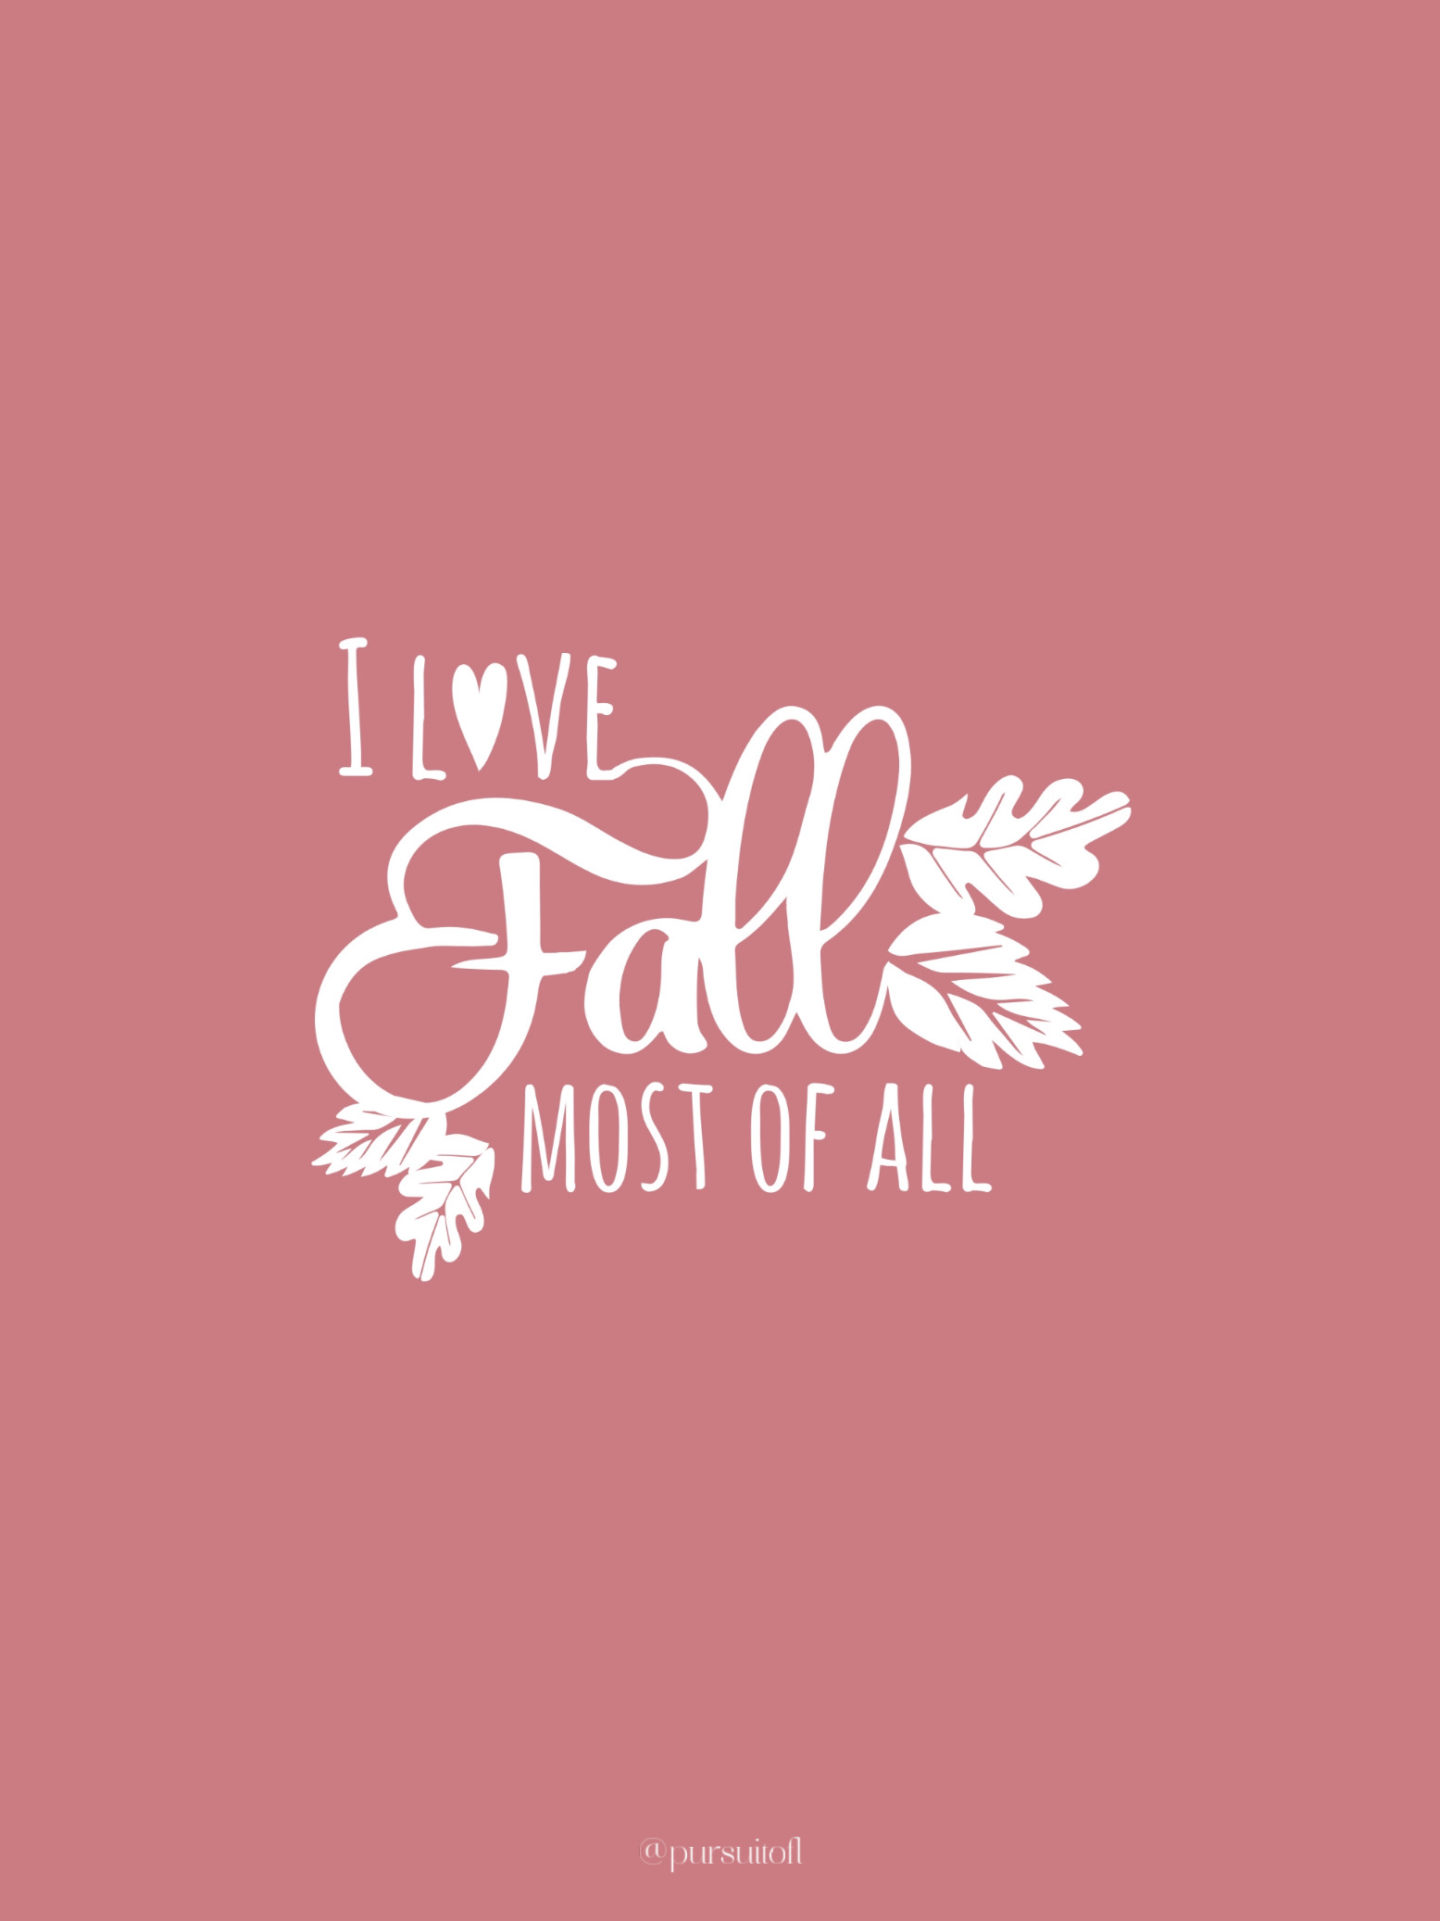 Grapefruit/pink color tablet wallpaper with I love fall most of all text in white